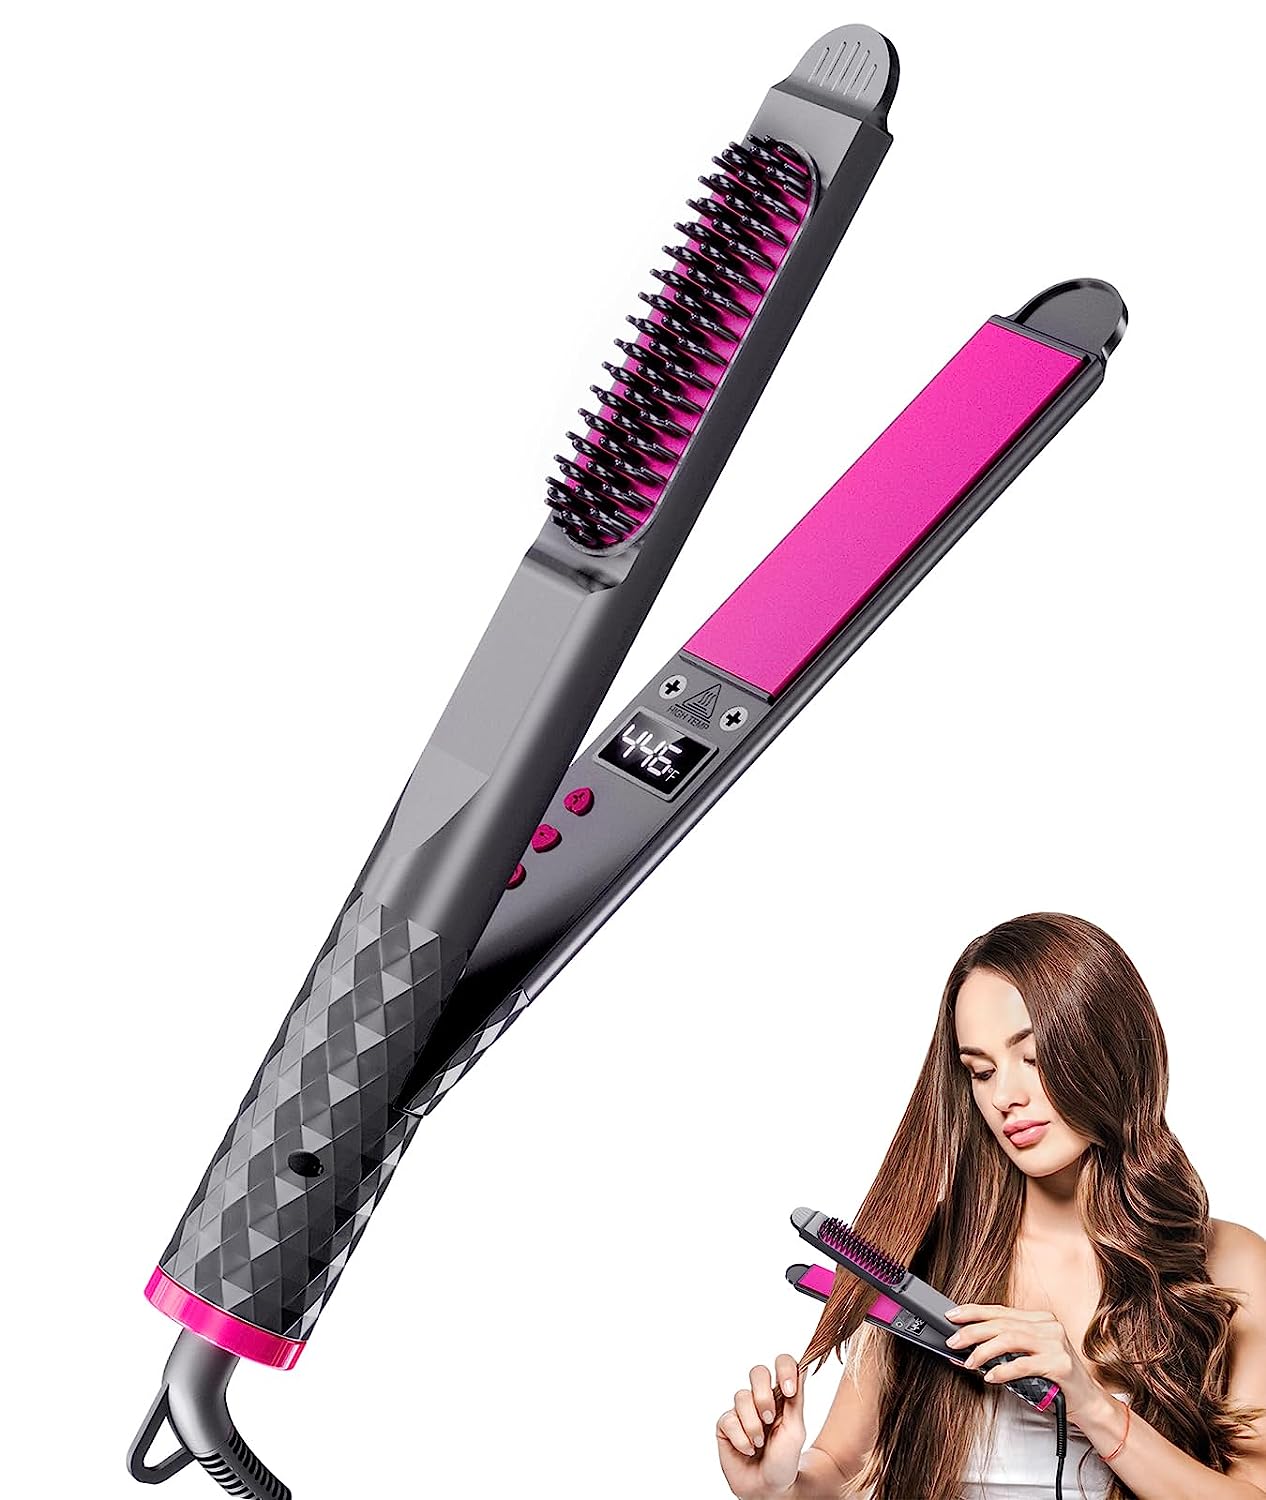 straightner available review